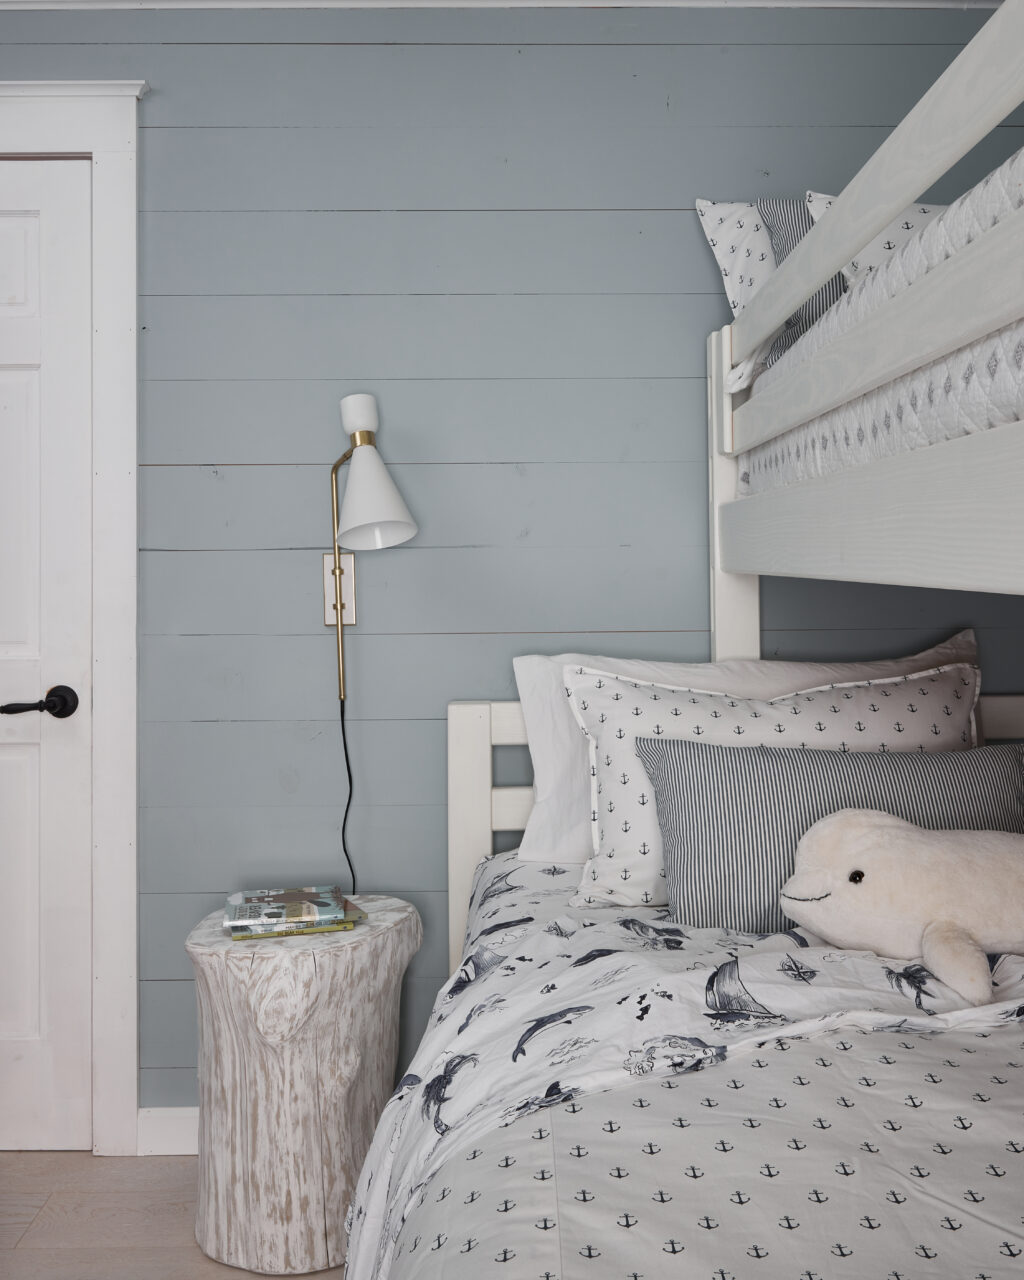 white bunk bed with nautical theme bedding, white seal stuffed animal and white wood stump bedside table